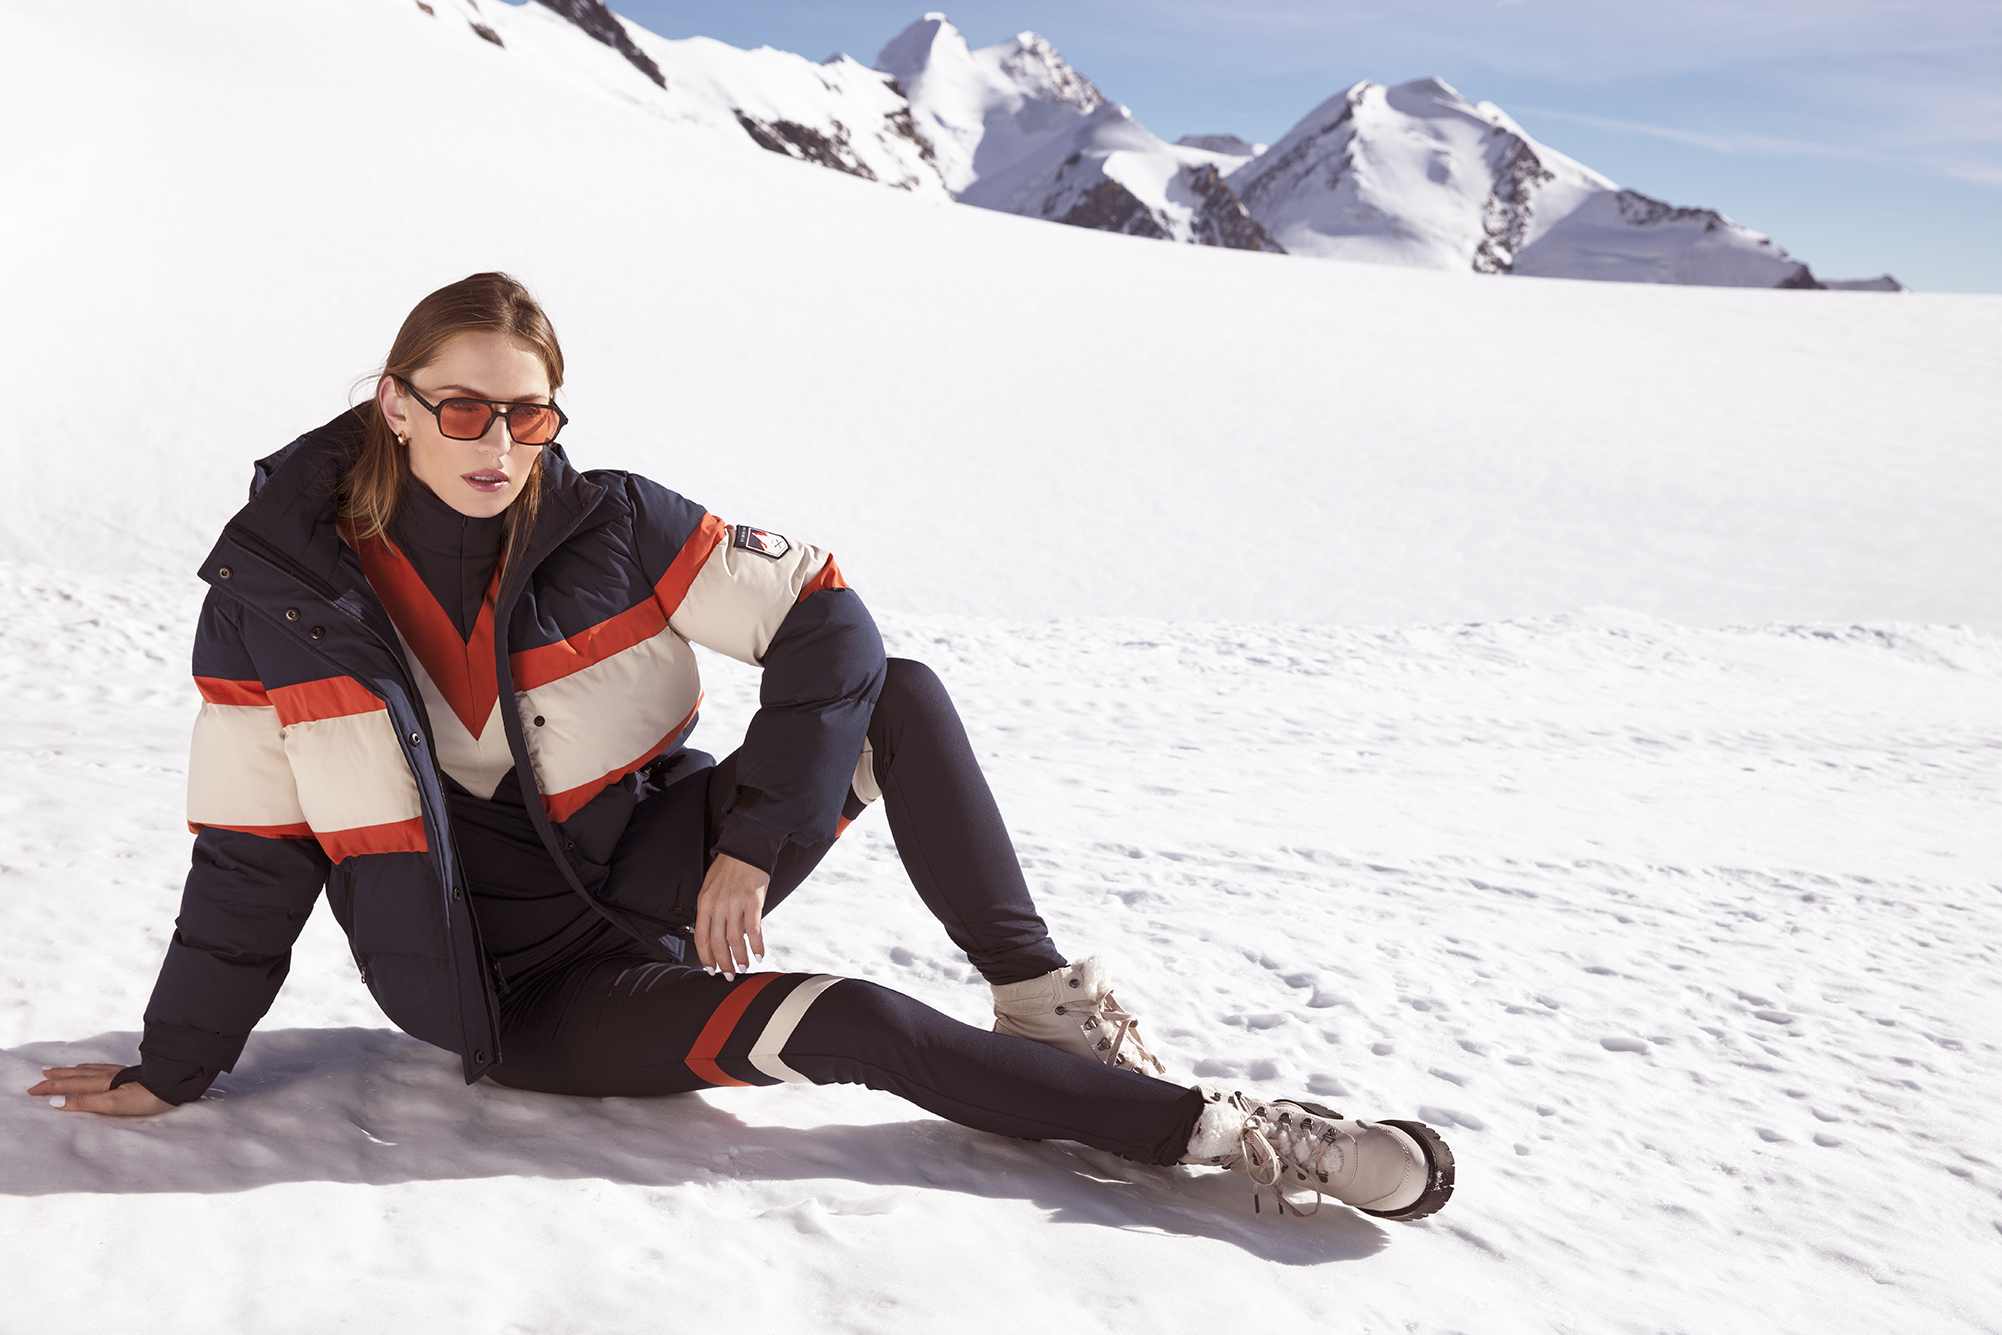 Why The Ski Capsule from By Malina is the ultimate ski collection you need for winter 21/22. 4